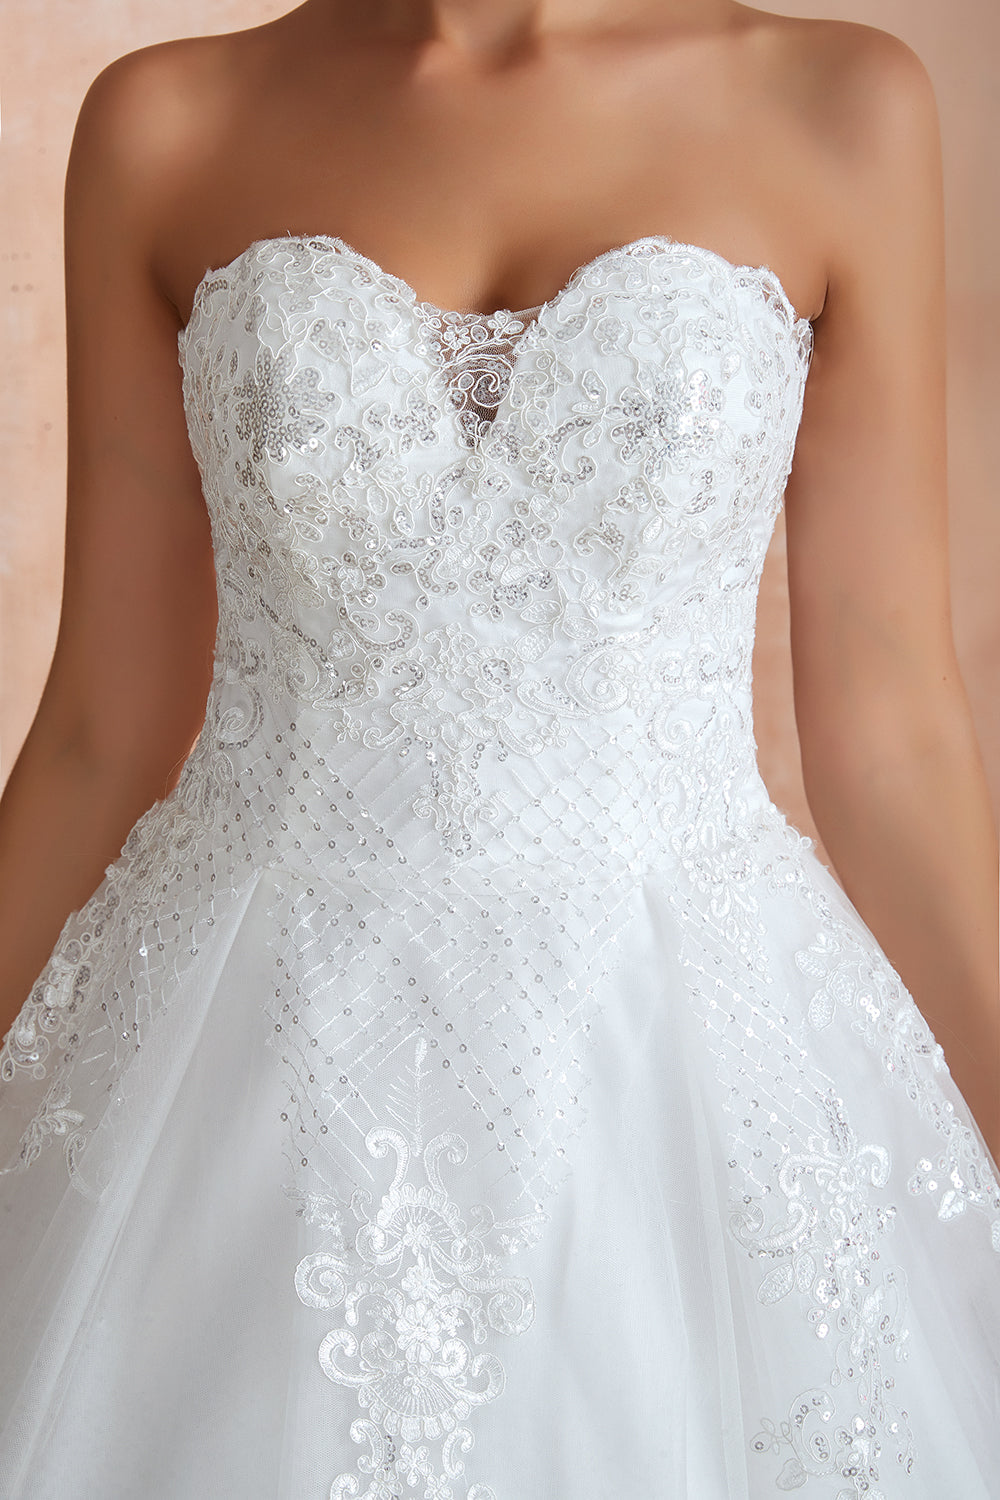 Stylish Strapless White Lace Affordable Wedding Dress with Low Back